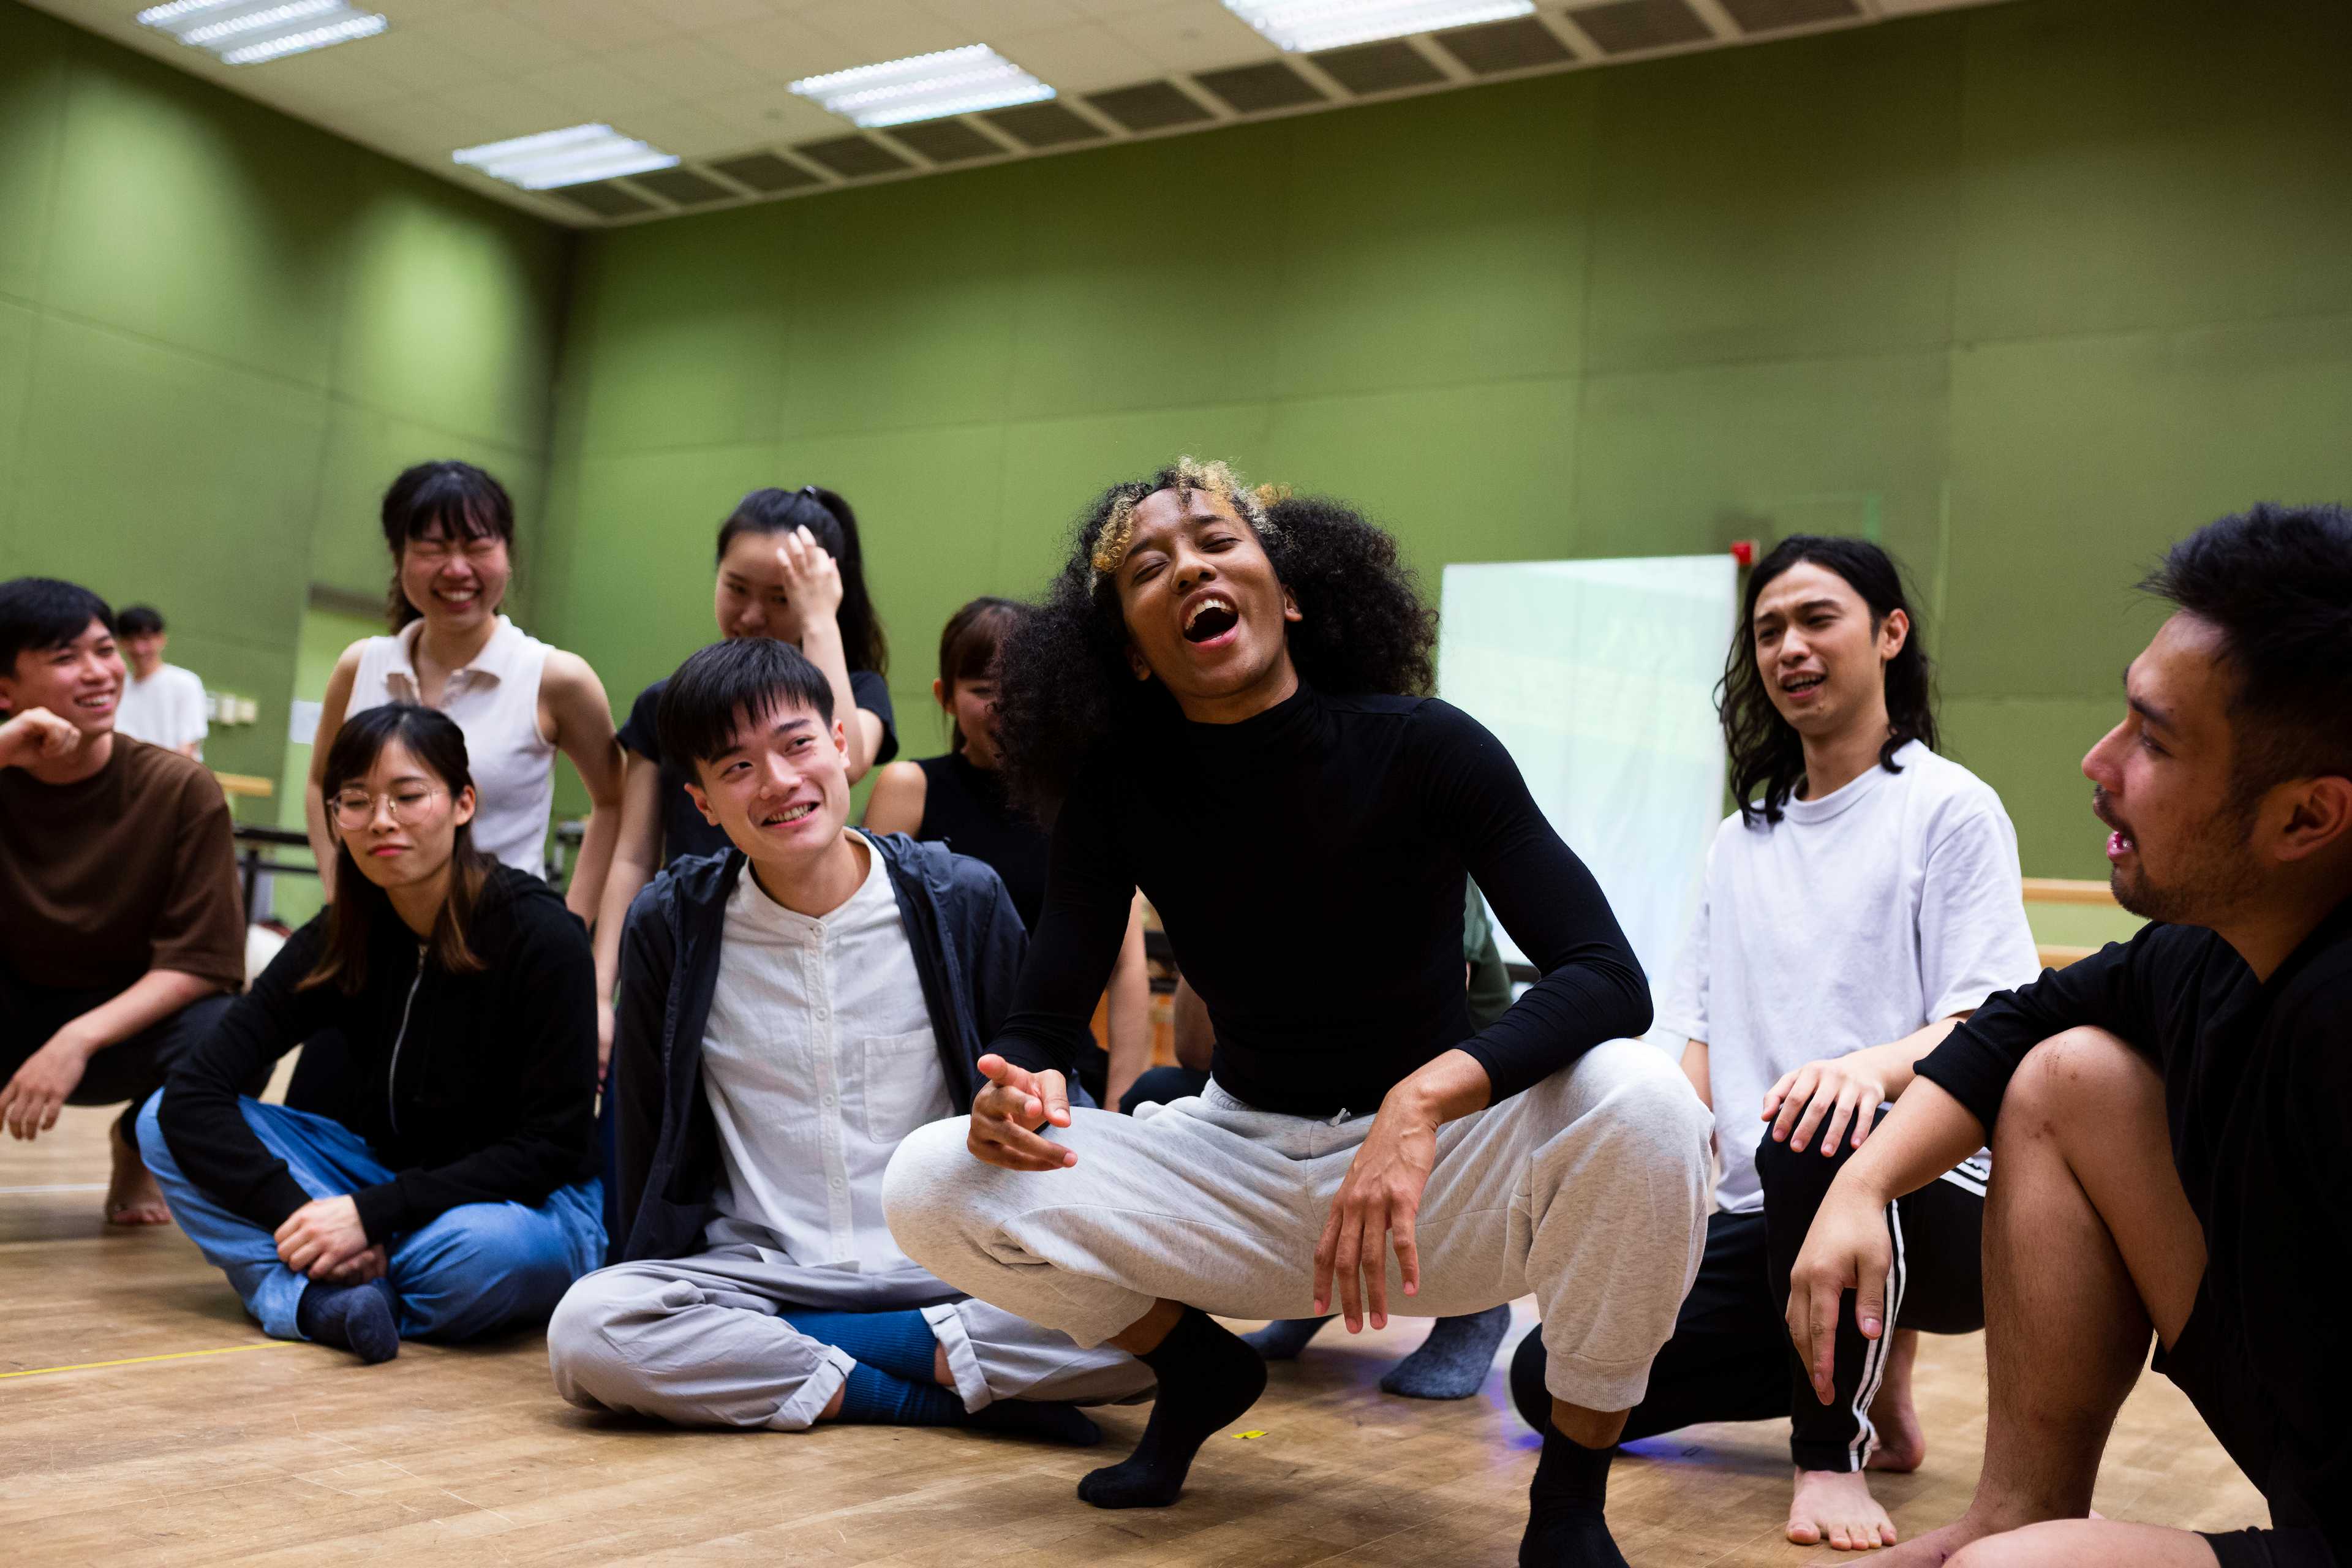 Songs of Innocence and Experience Rehearsal | Featuring: Lee On-sang, Caroline Chan, Sum Cheuk-yiu, Chew Yu-yeung, Lau Ka-ying, Mak Ho-tin, Lo Man-chak, Mok Kok-pong, Sin Lok-yan | Tagged as: Songs of Innocence and Experience, Rehearsal | Photo: Ivor Houlker, Rooftop Productions |  (Rooftop Productions • Hong Kong Theatre Company)  | Rooftop Productions • Hong Kong Theatre Company